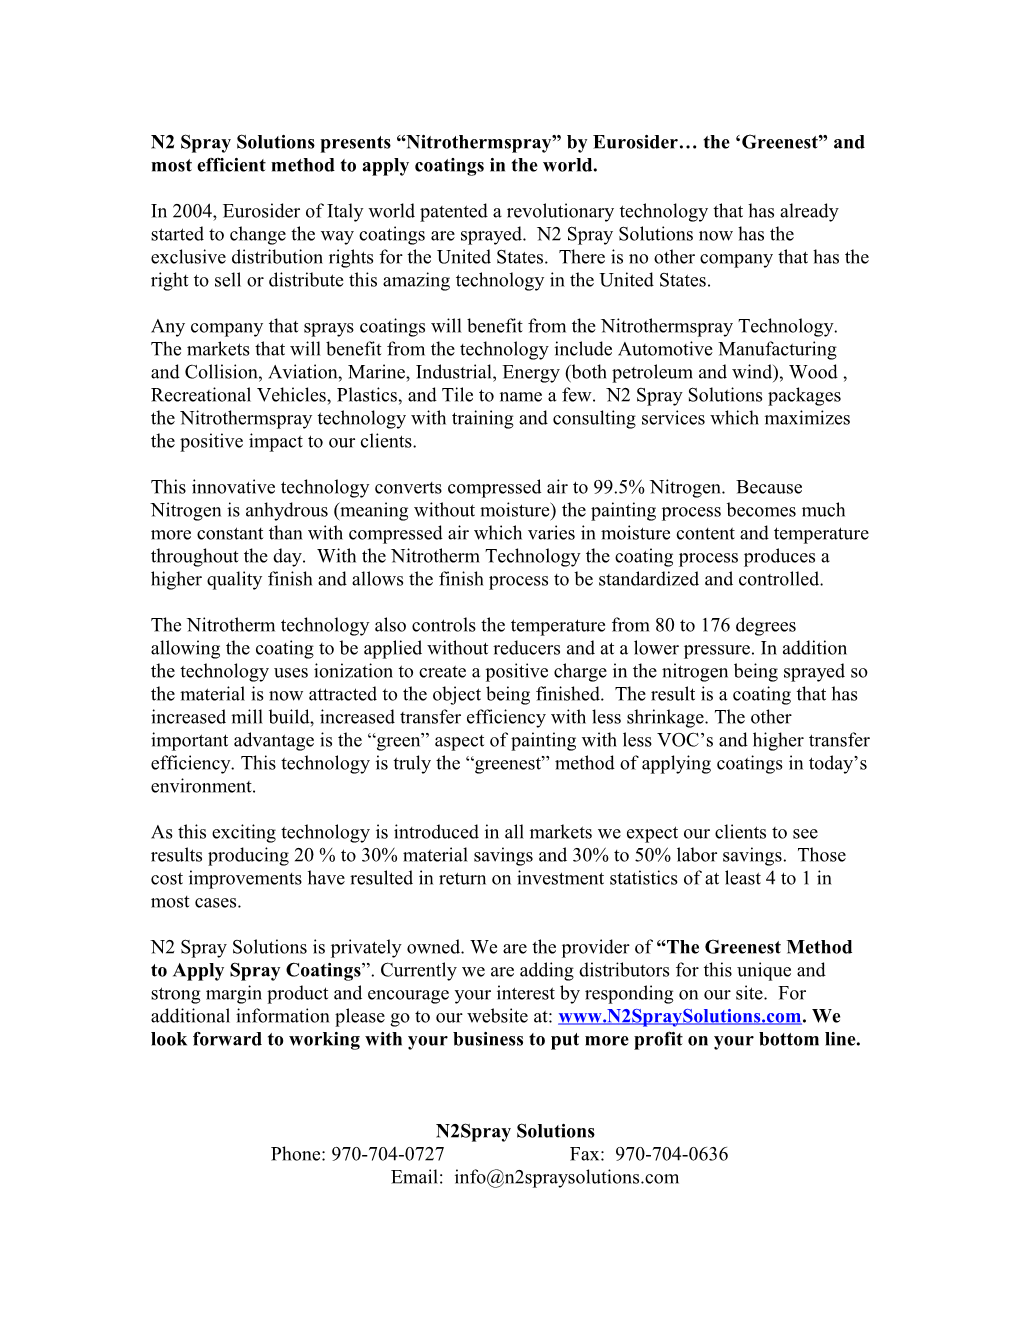 Press Release for IWF Woodworking Trade Show